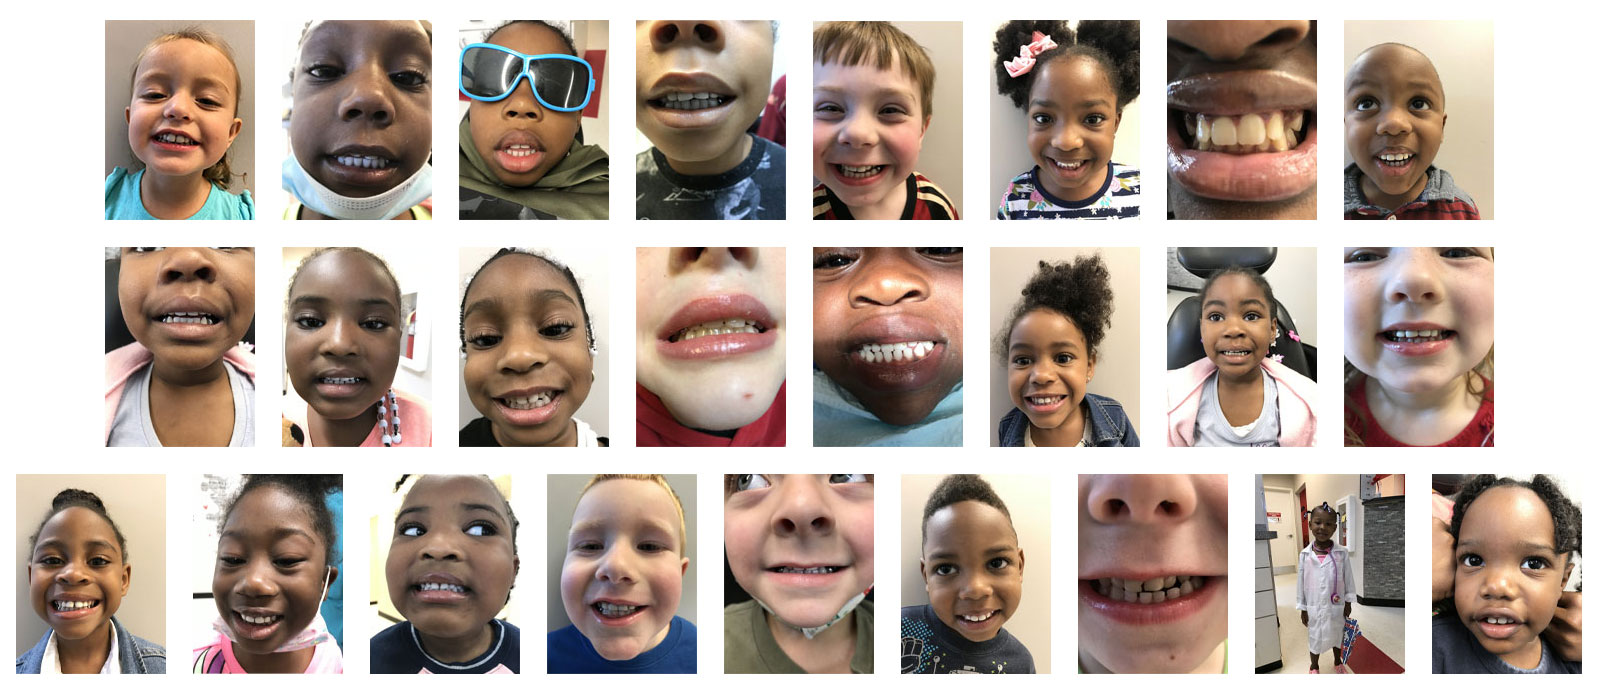 A collage of children 's faces with different expressions.